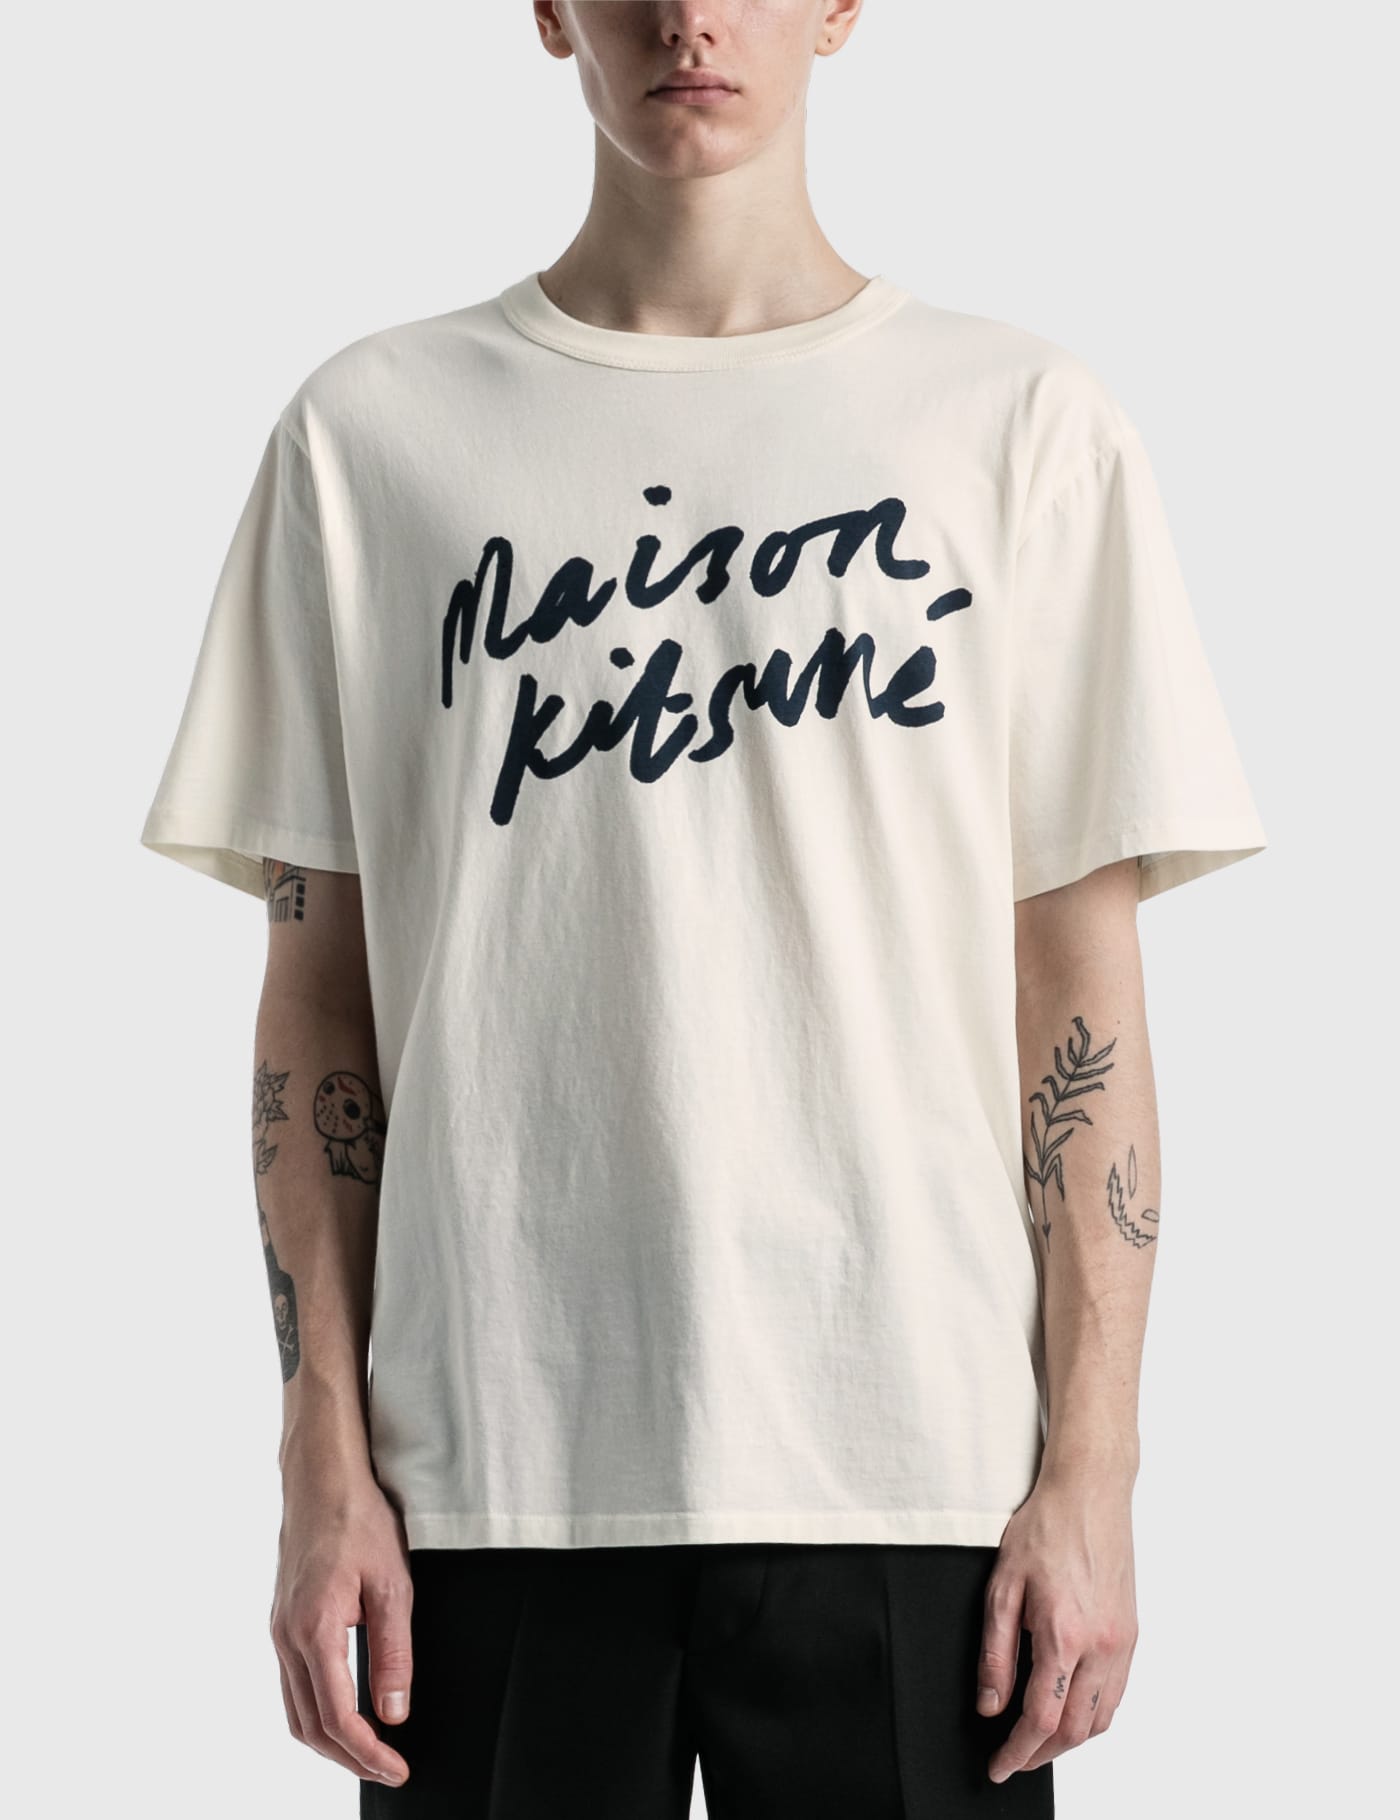 Maison Kitsune - Handwriting Classic T-shirt | HBX - Globally Curated  Fashion and Lifestyle by Hypebeast